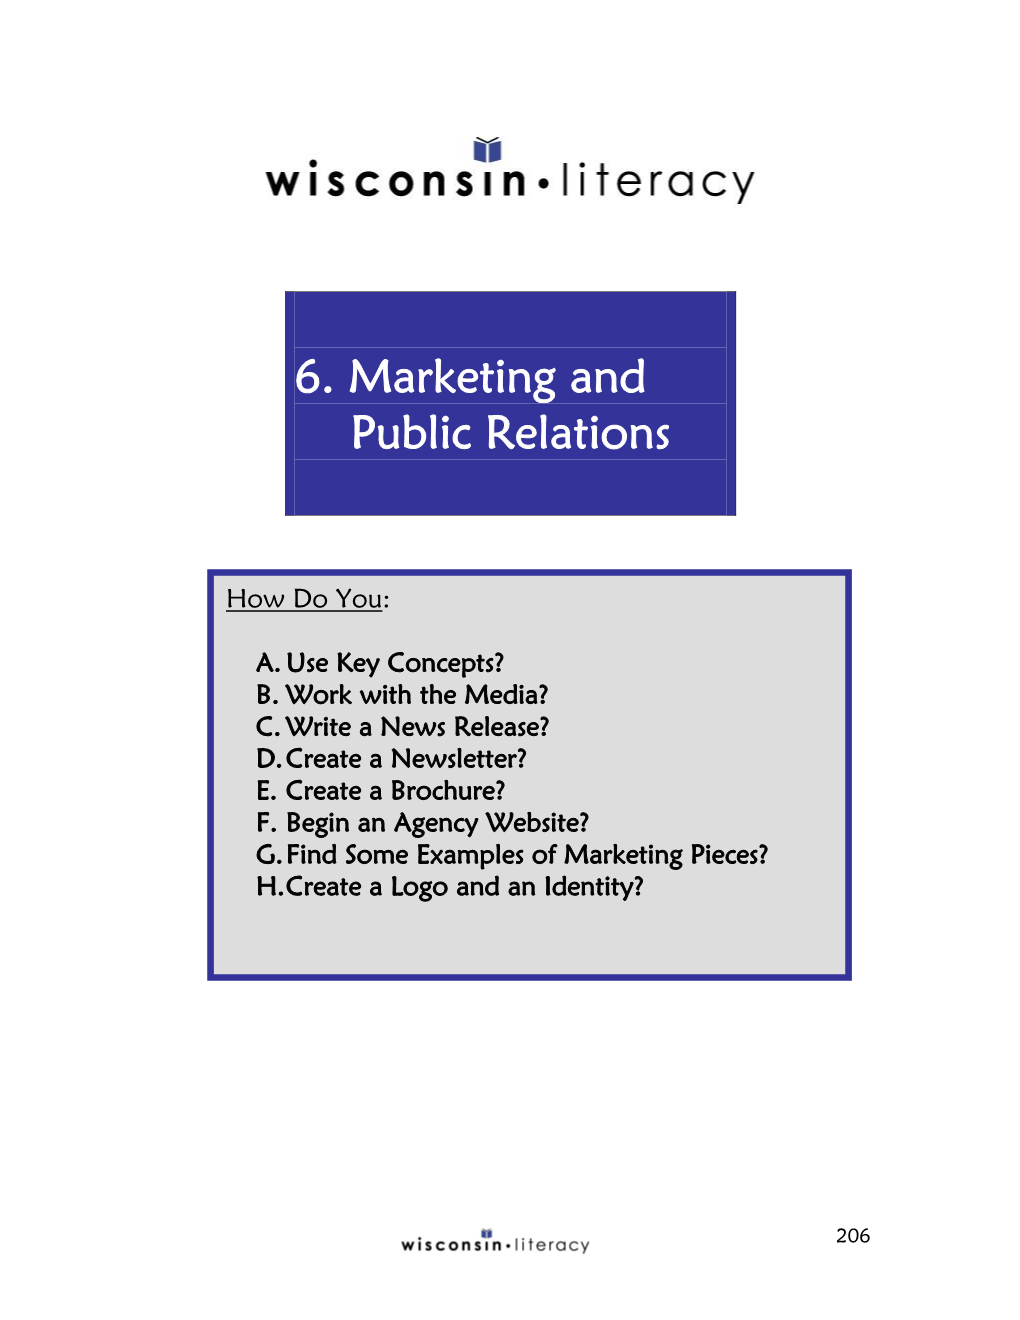 6. Marketing and Public Relations